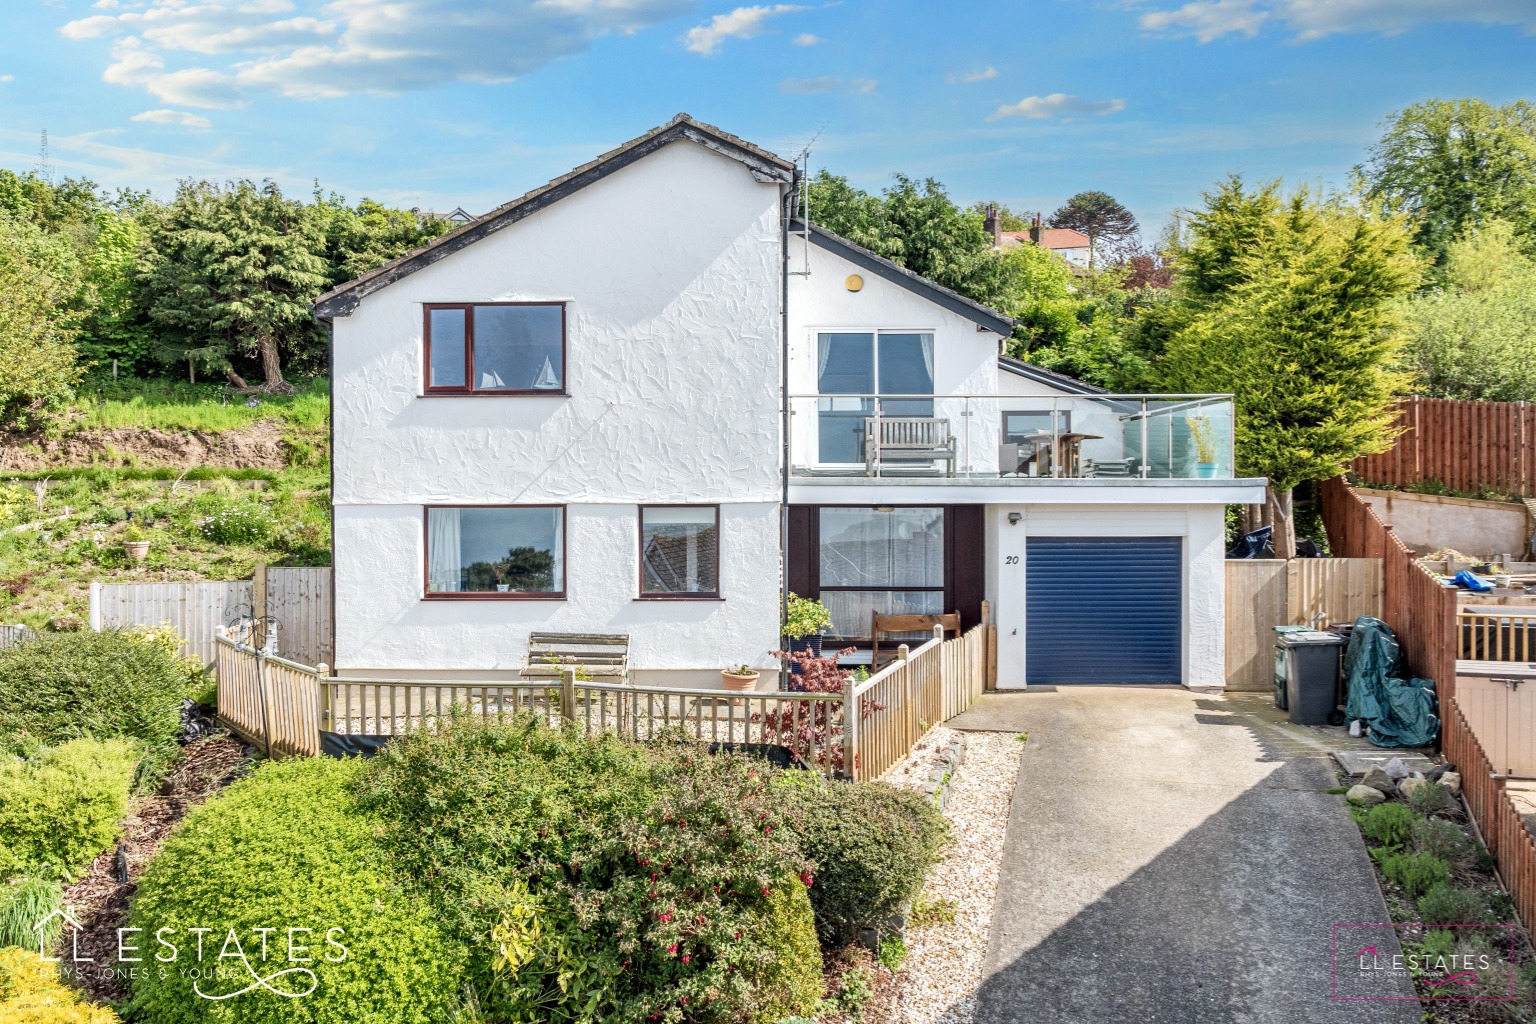 4 bed detached house for sale in Ffordd Tirionfa, Colwyn Bay - Property Image 1